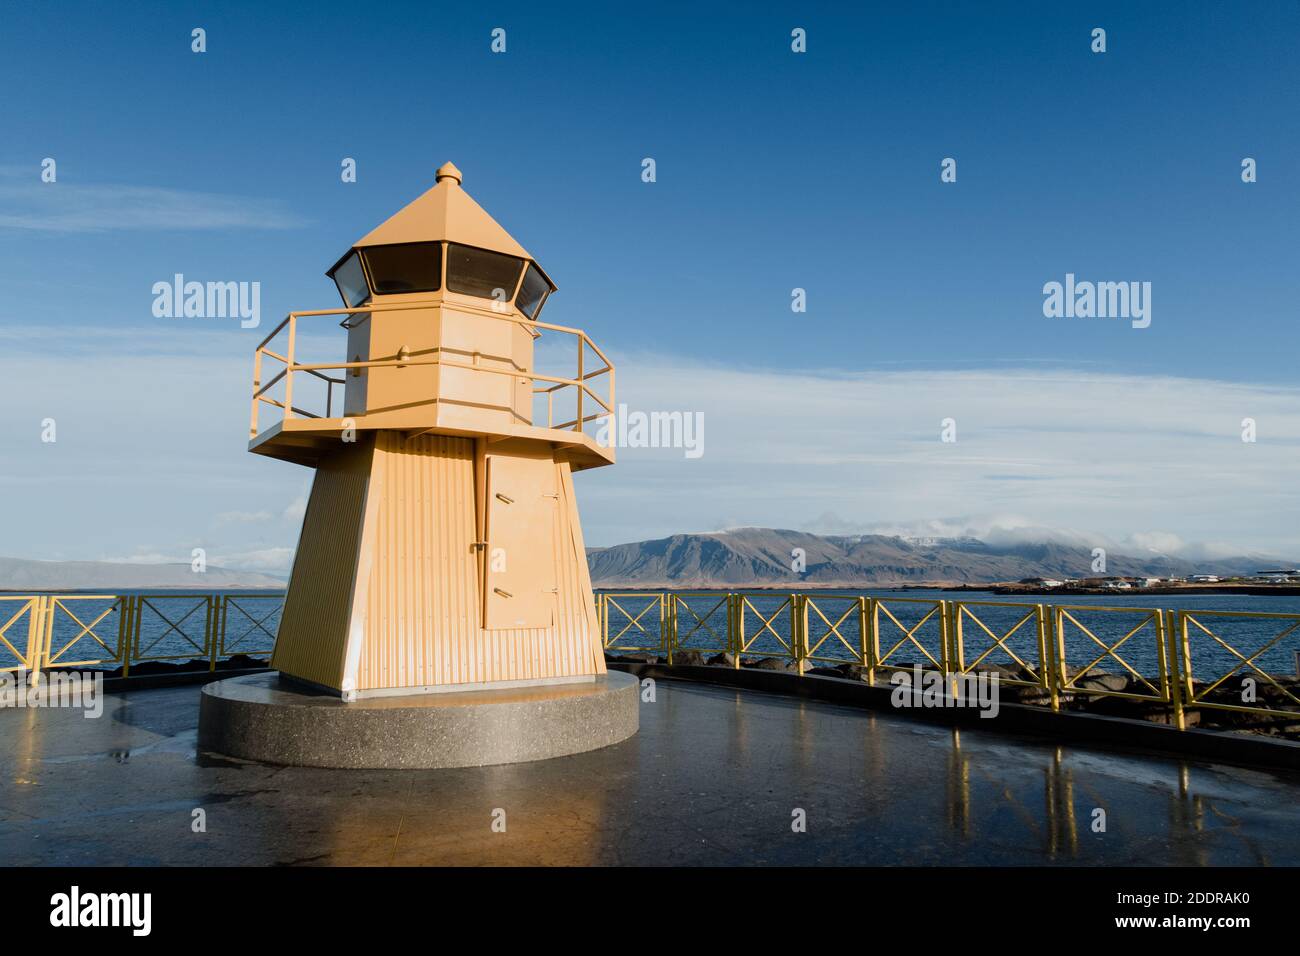 A typical yellow lighthouse and lookout on the shoreline of the city of Reykjavík, Iceland Stock Photo